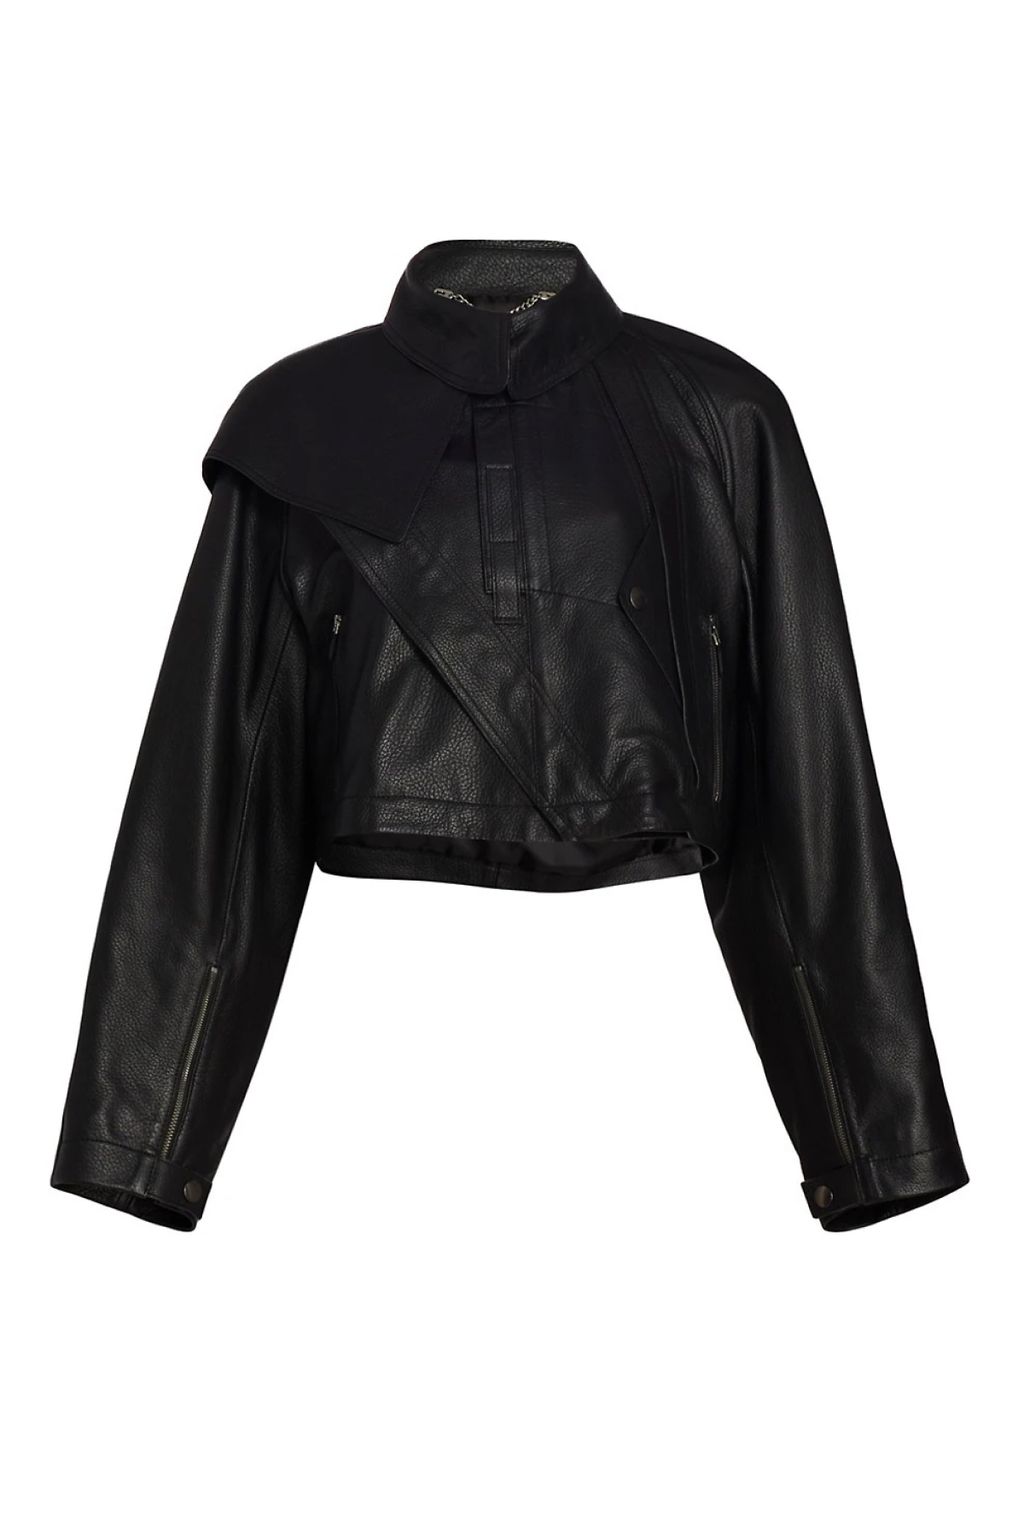 The 18 Best Leather Jackets for Women, According to Stylists and ...